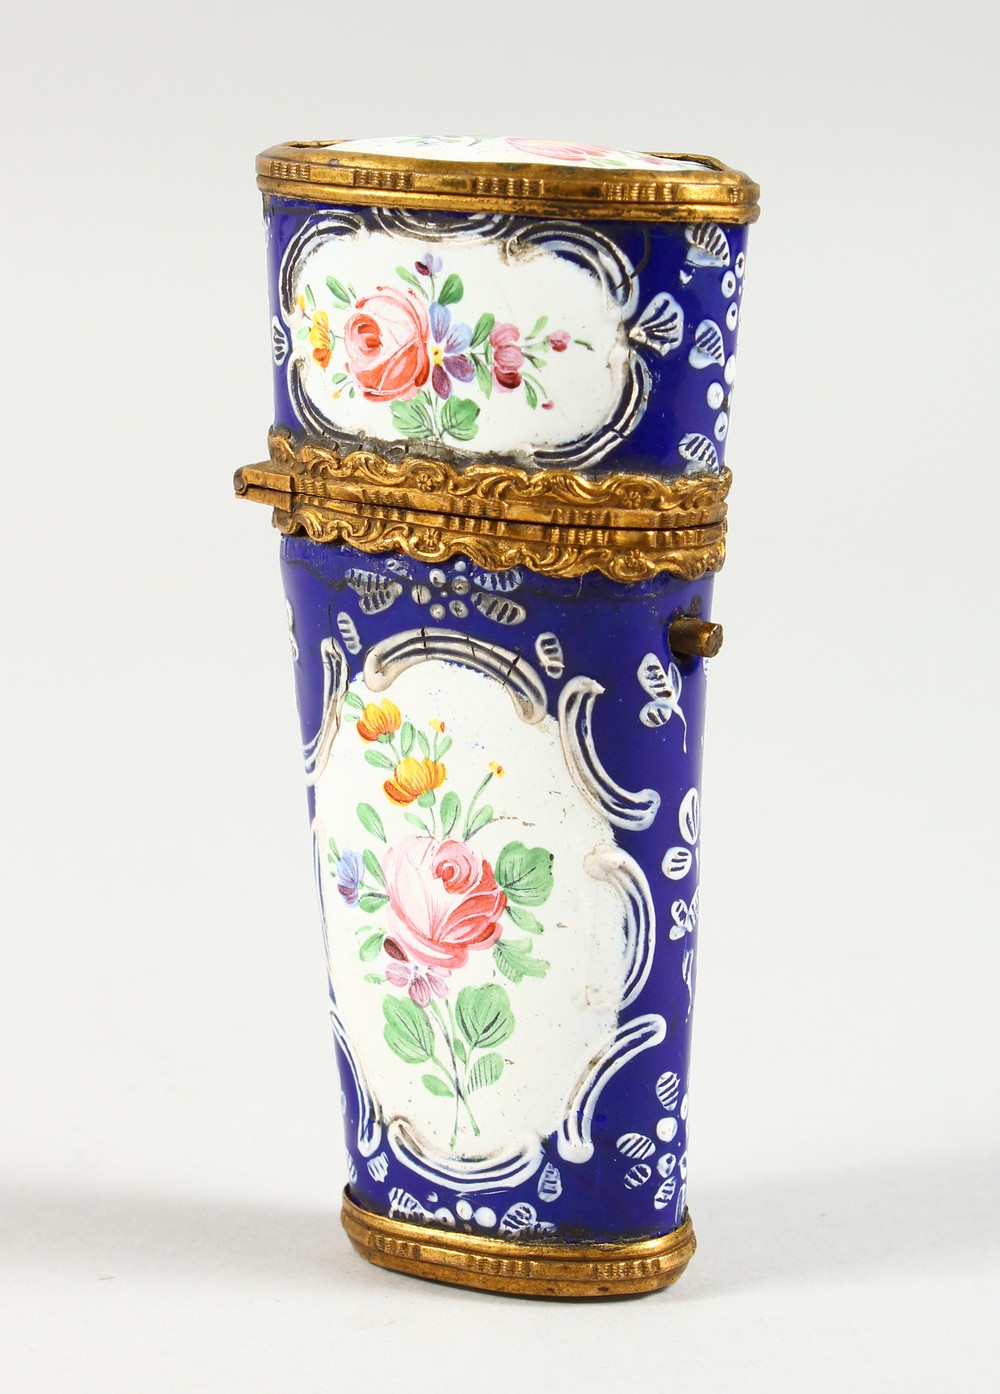 AN 18TH CENTURY BILSTON BLUE ENAMEL ETUI, with fitments and panels of flowers. 4ins long.